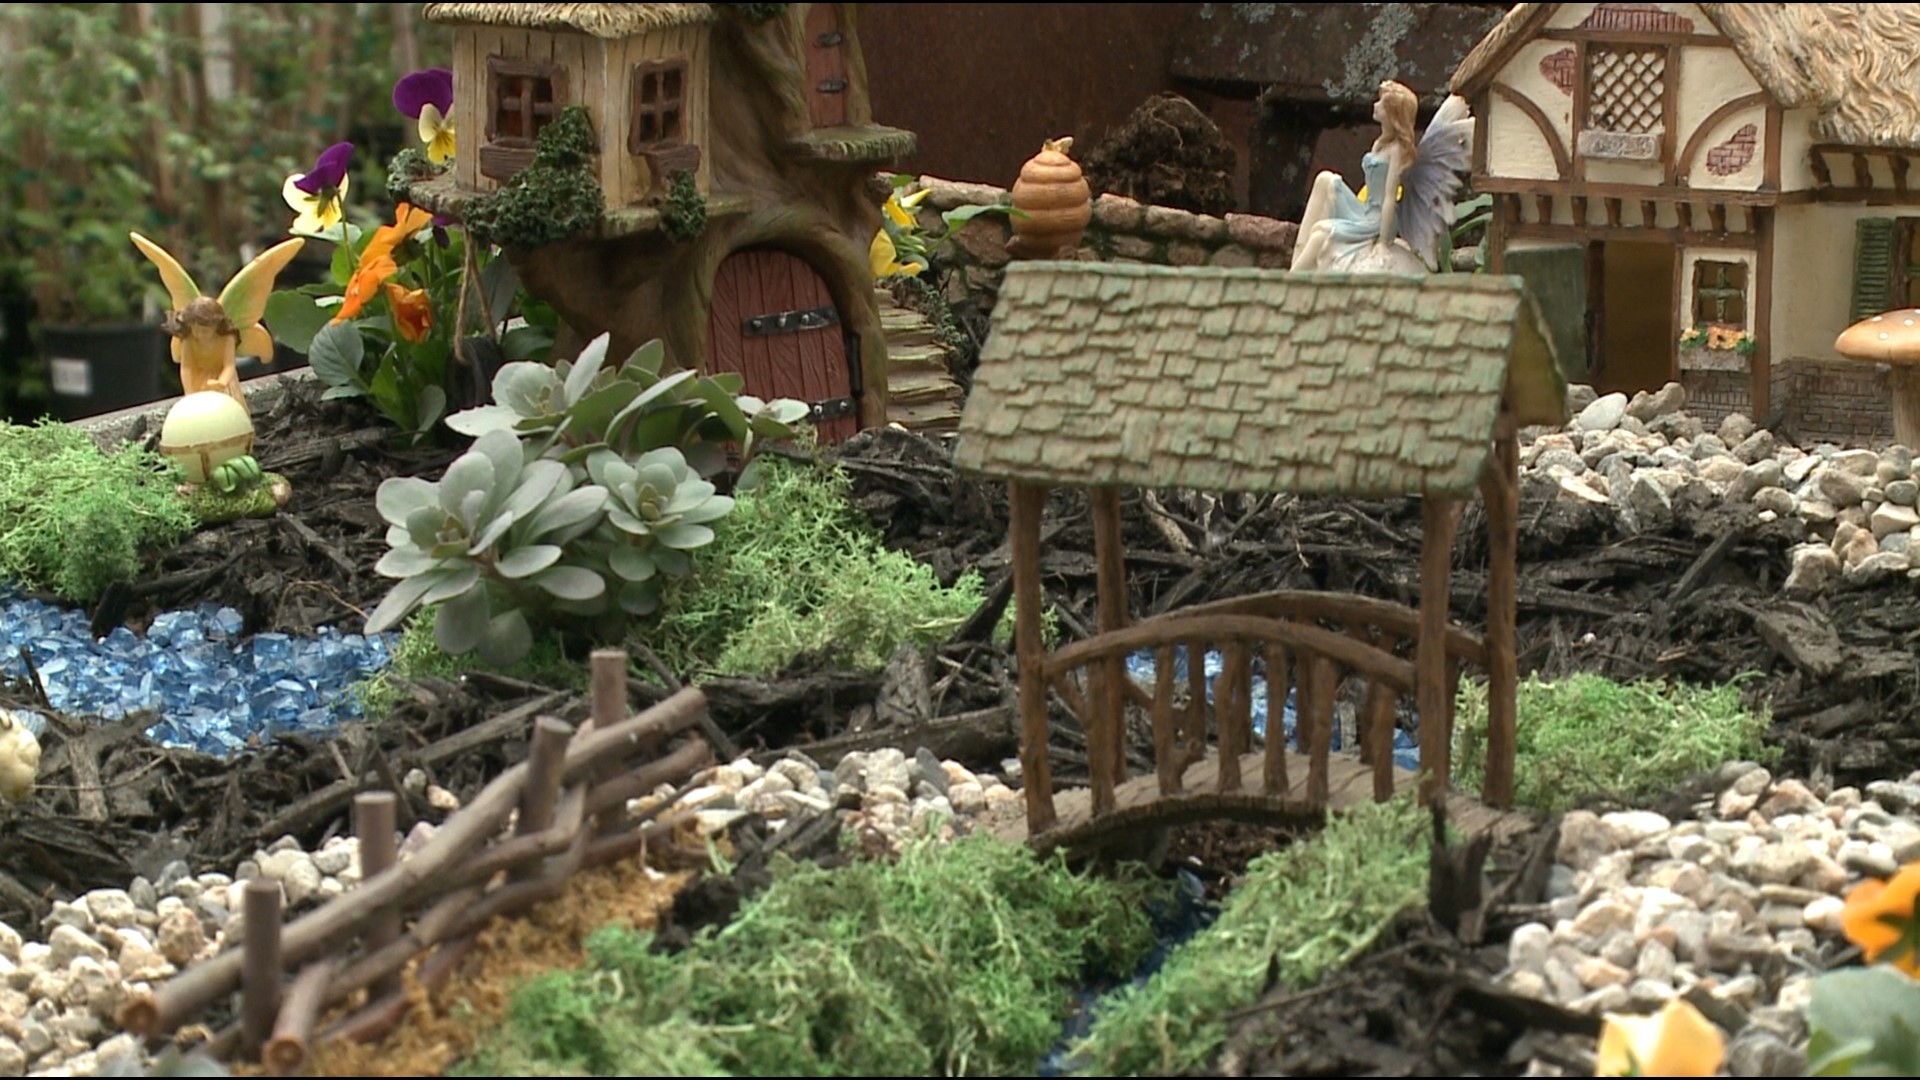 Fairy gardens and tropical plants continue to be favorites.